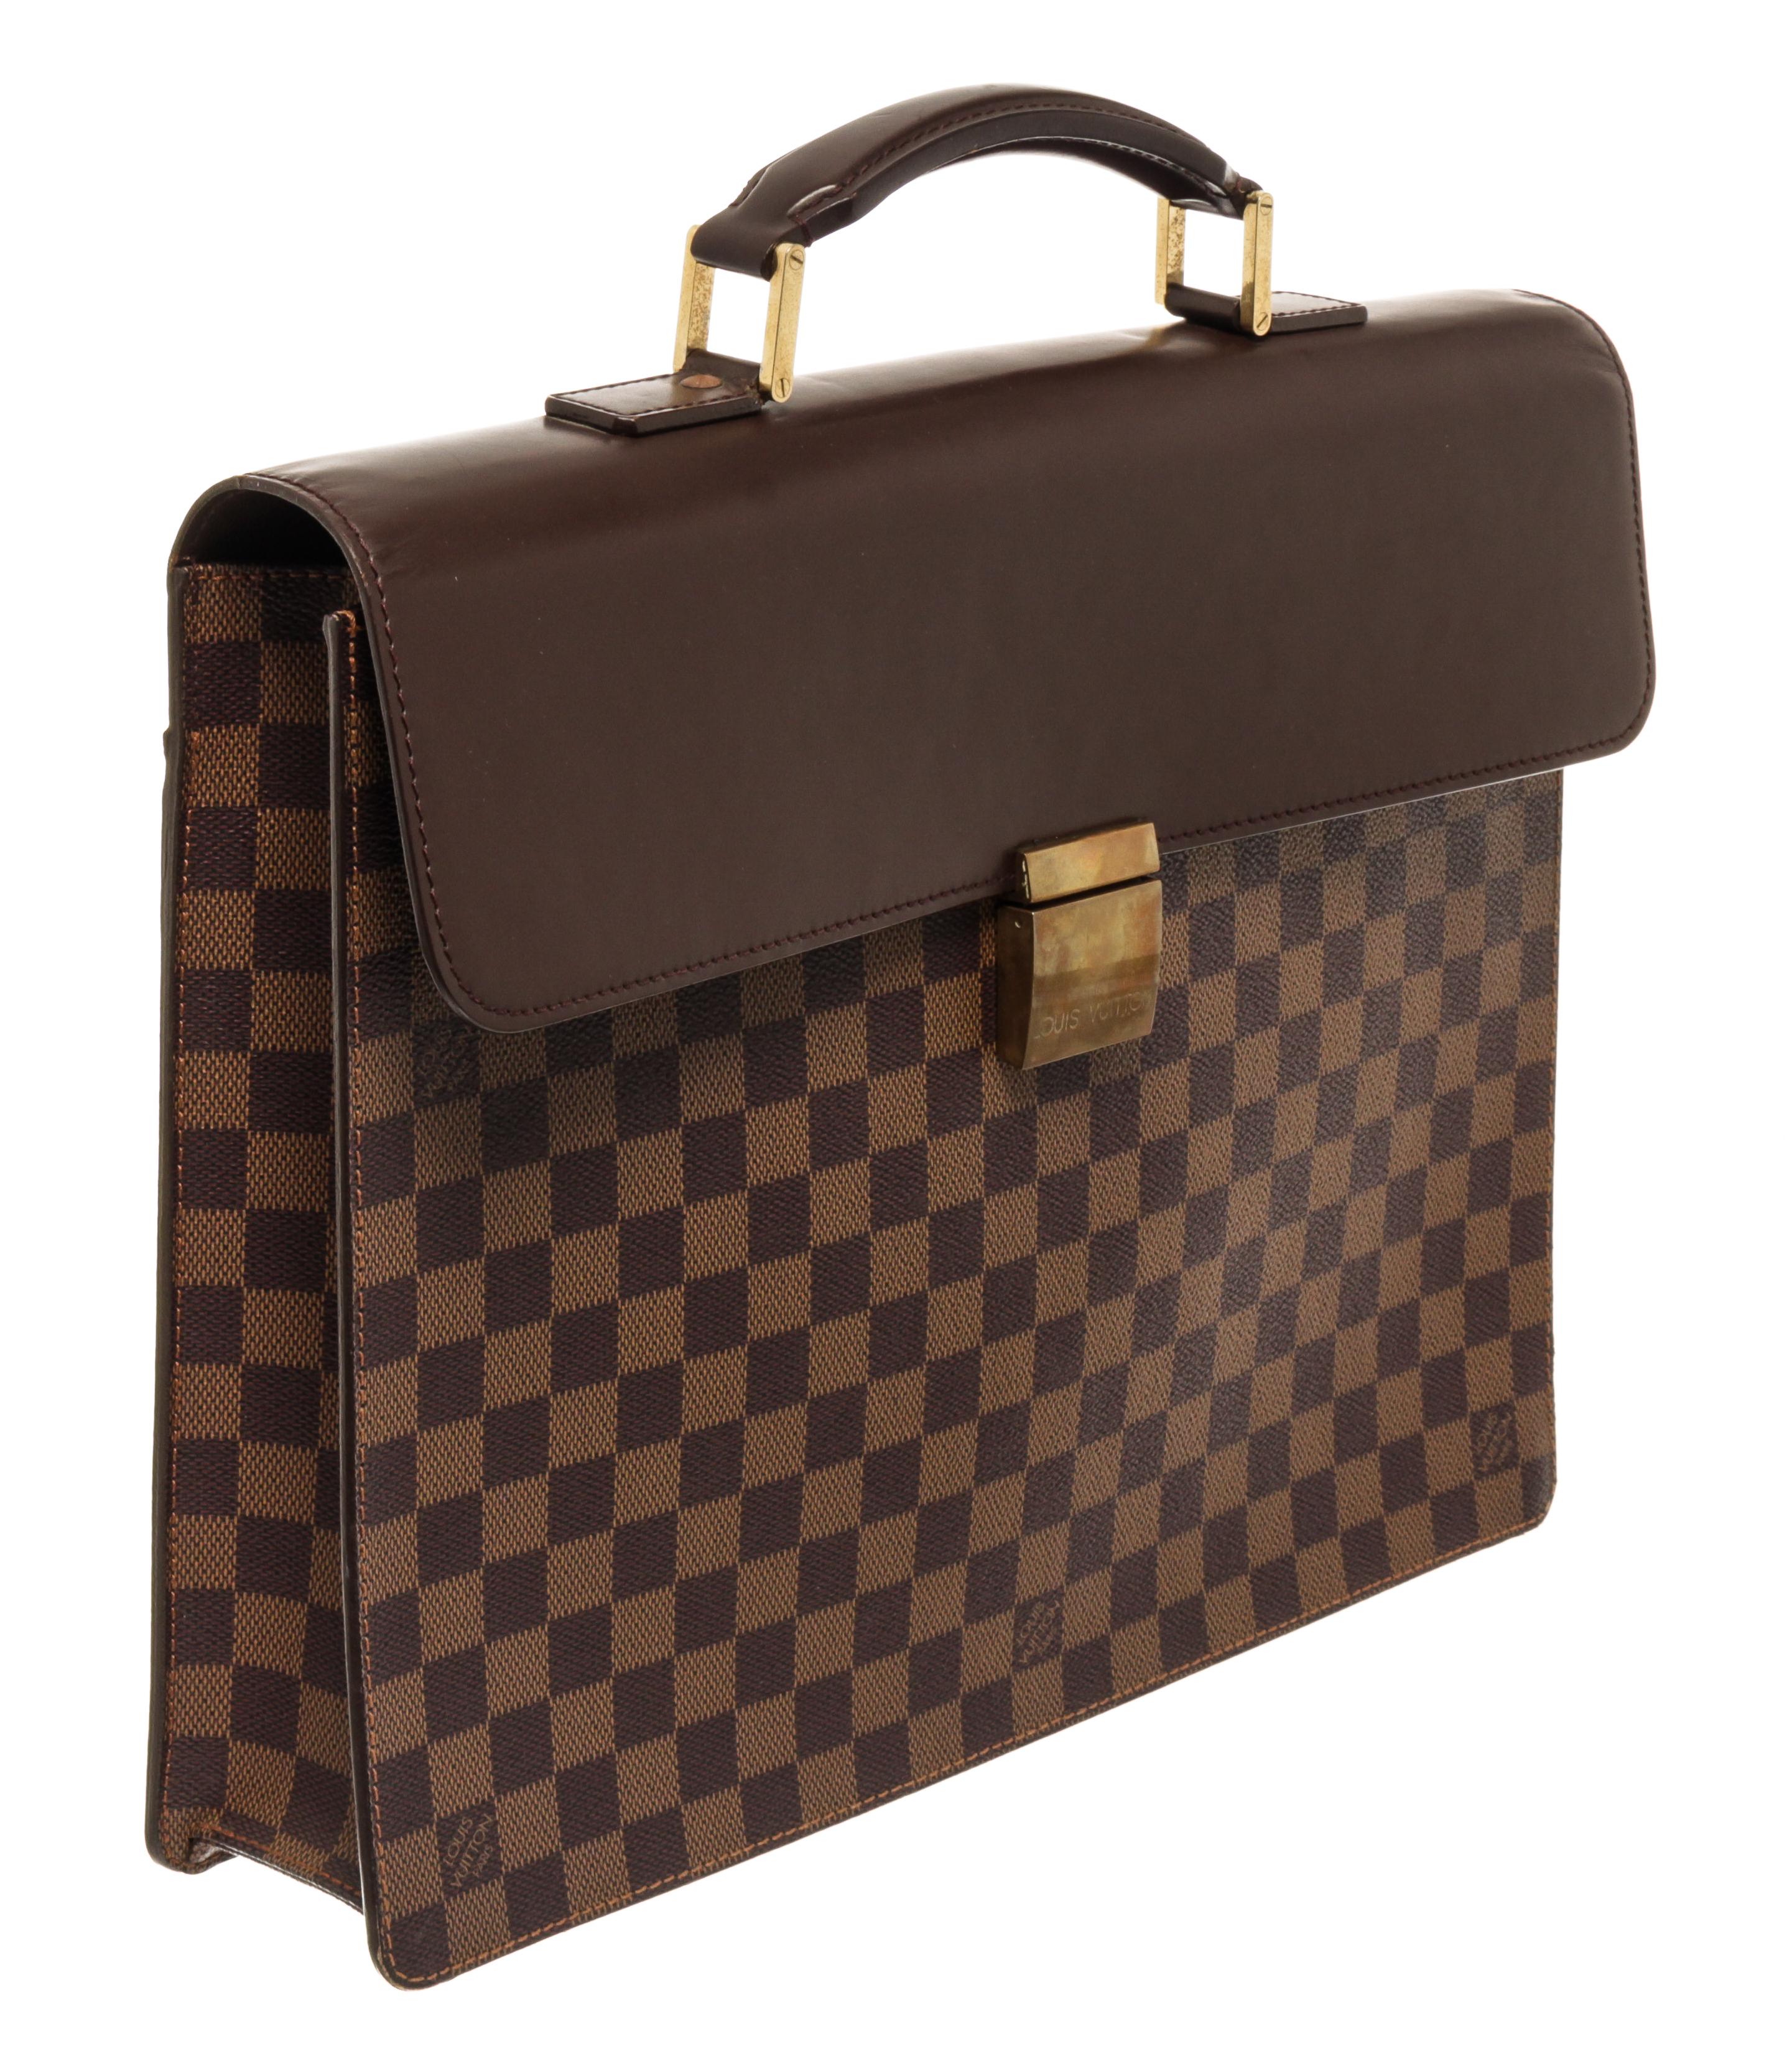 Louis Vuitton Brown Damier Ebene Altona PM Briefcase with gold tone hardware, with brown leather trim, brown suede lining, interior open pockets, with a buckle closure.

77819MSC